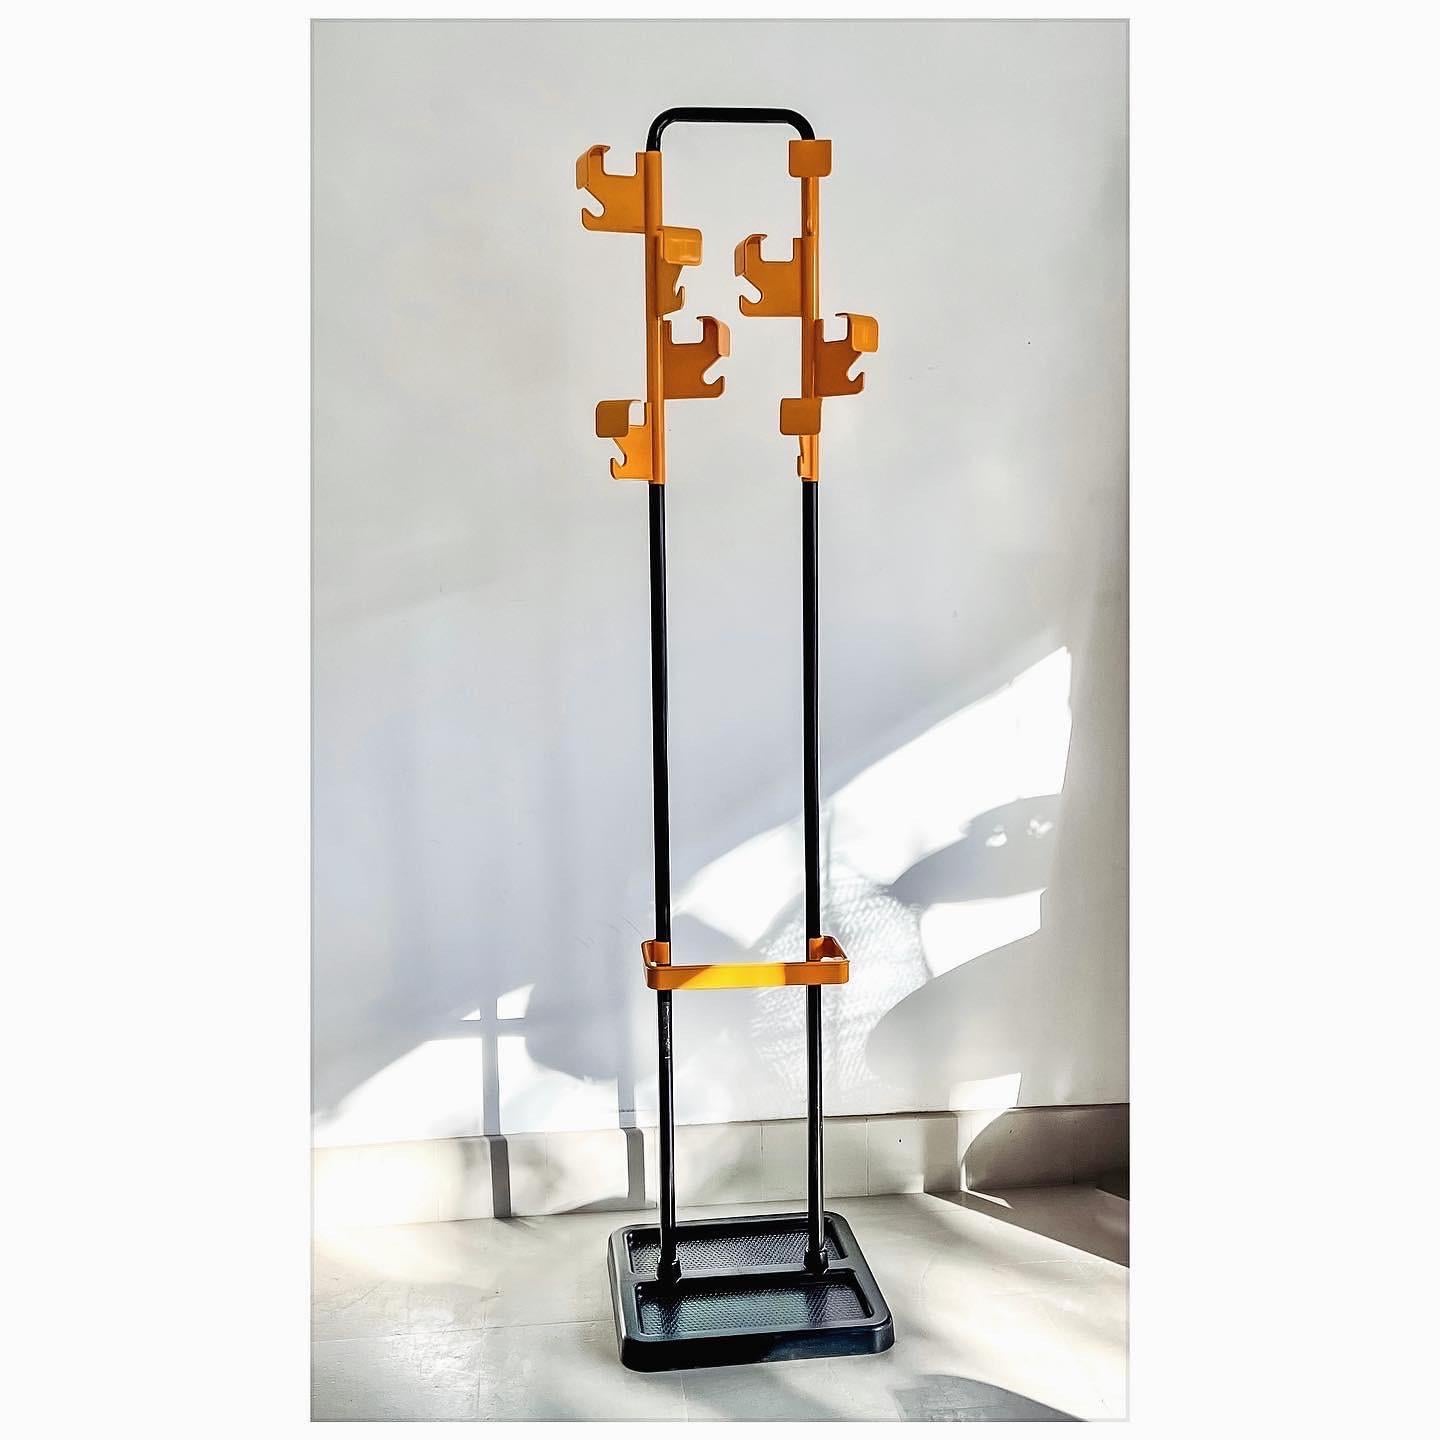 Space Age Coat Rack by Jean-Pierre Vitrac for Manade, 1970s For Sale 3